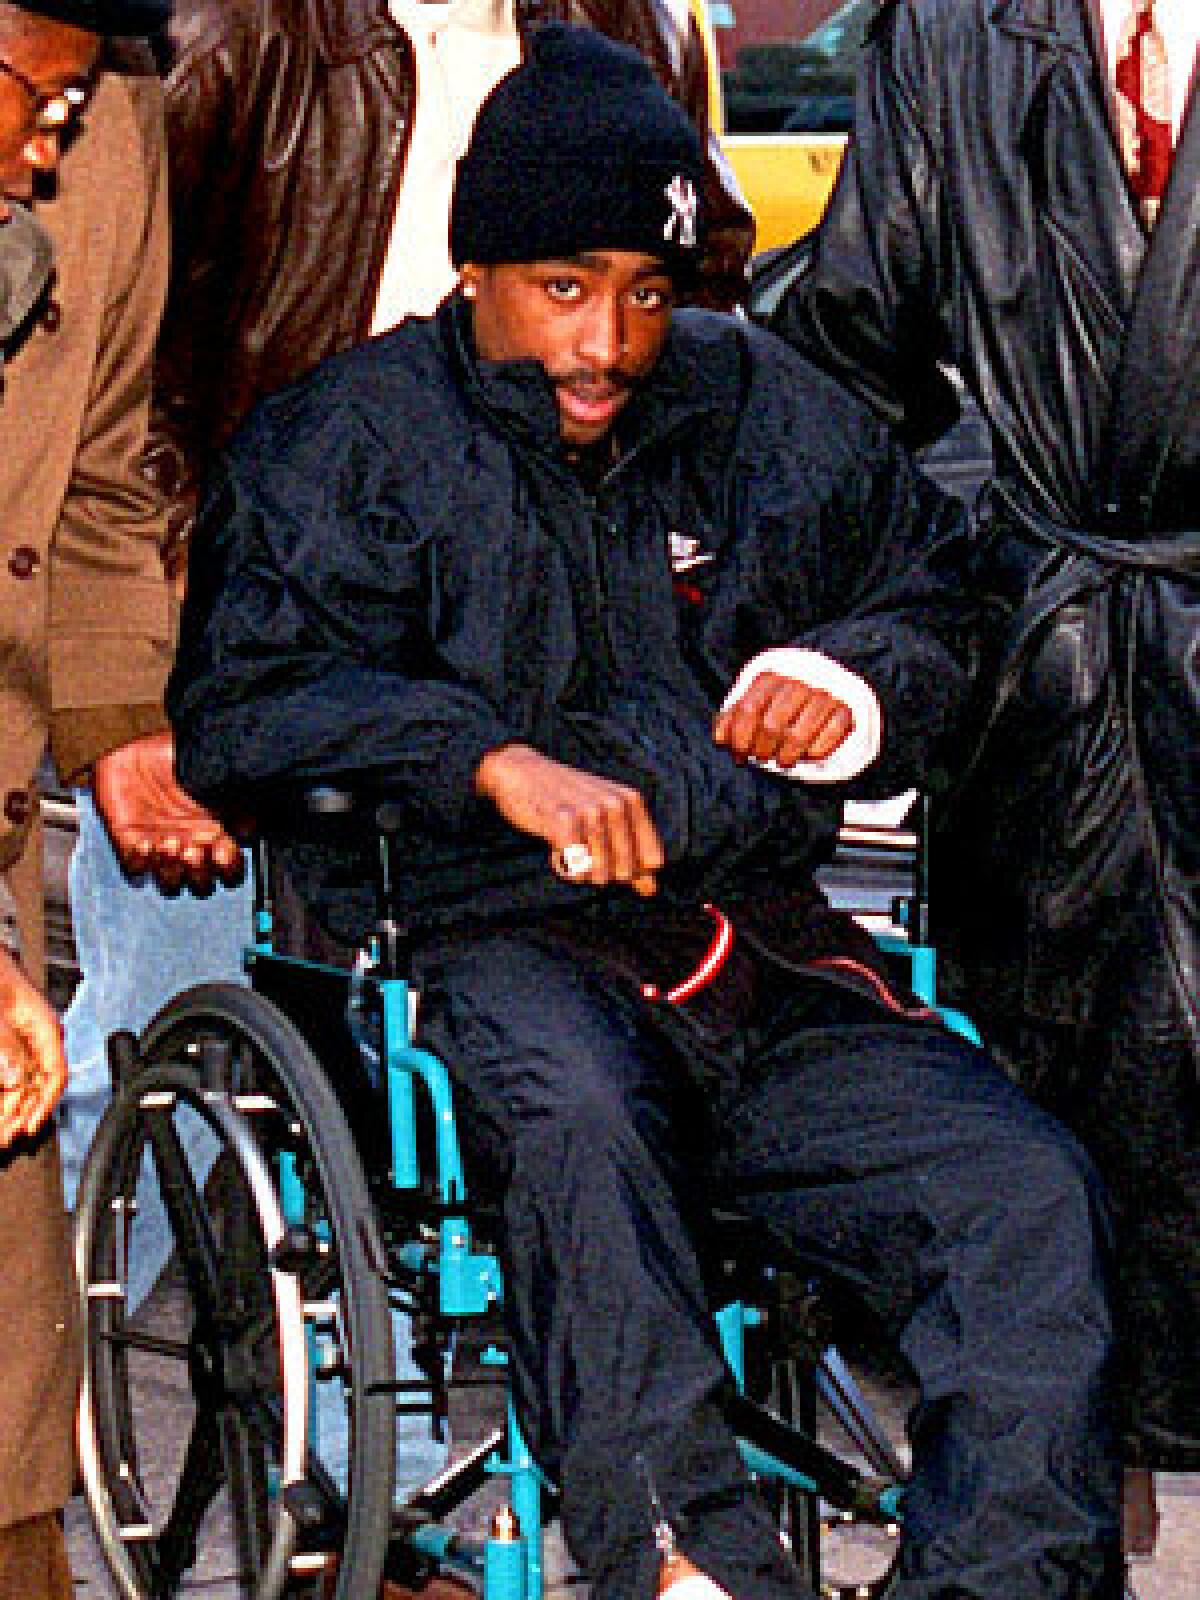 A bandaged Shakur rolls into court in a wheelchair on Dec. 1, 1994, the day after the Quad shooting -- having signed himself out of the hospital against doctors' advice. In court, he was convicted of first-degree sexual abuse in a rape case involving a 19-year-old fan.